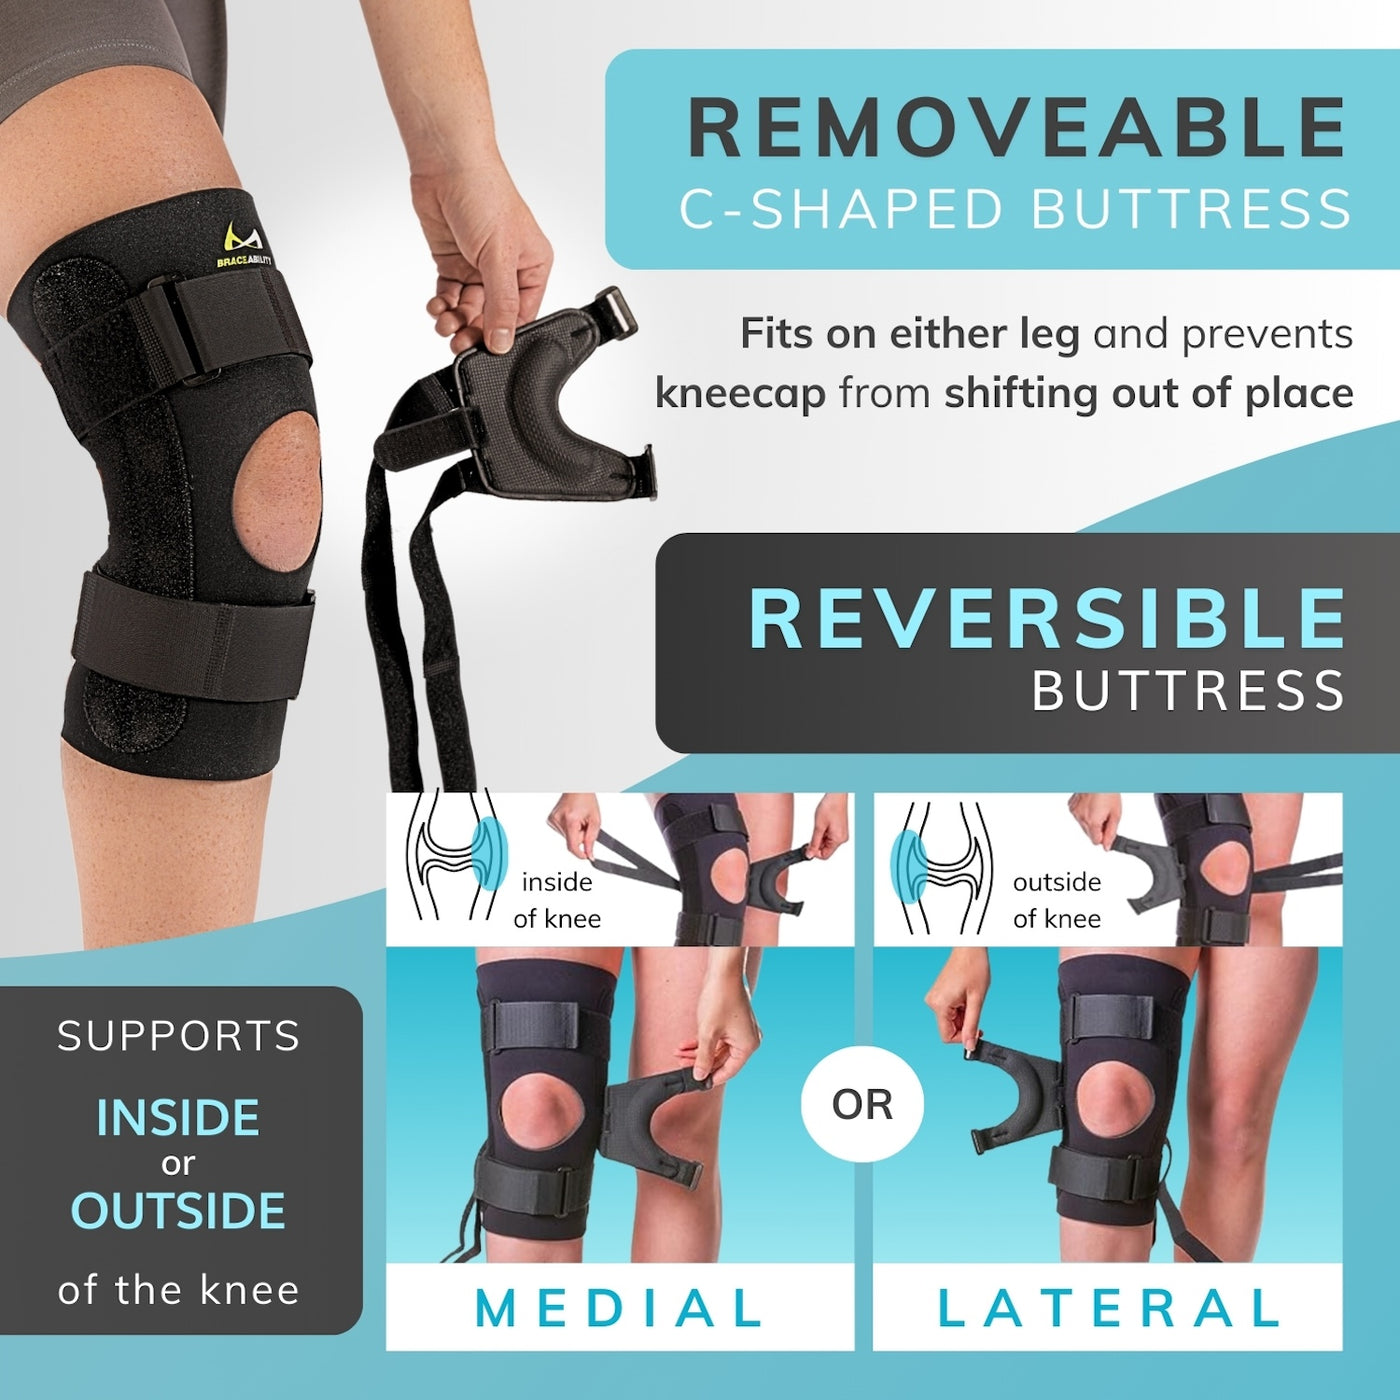 removable c-shaped buttress can be rotated to the inside or the outside of the knee